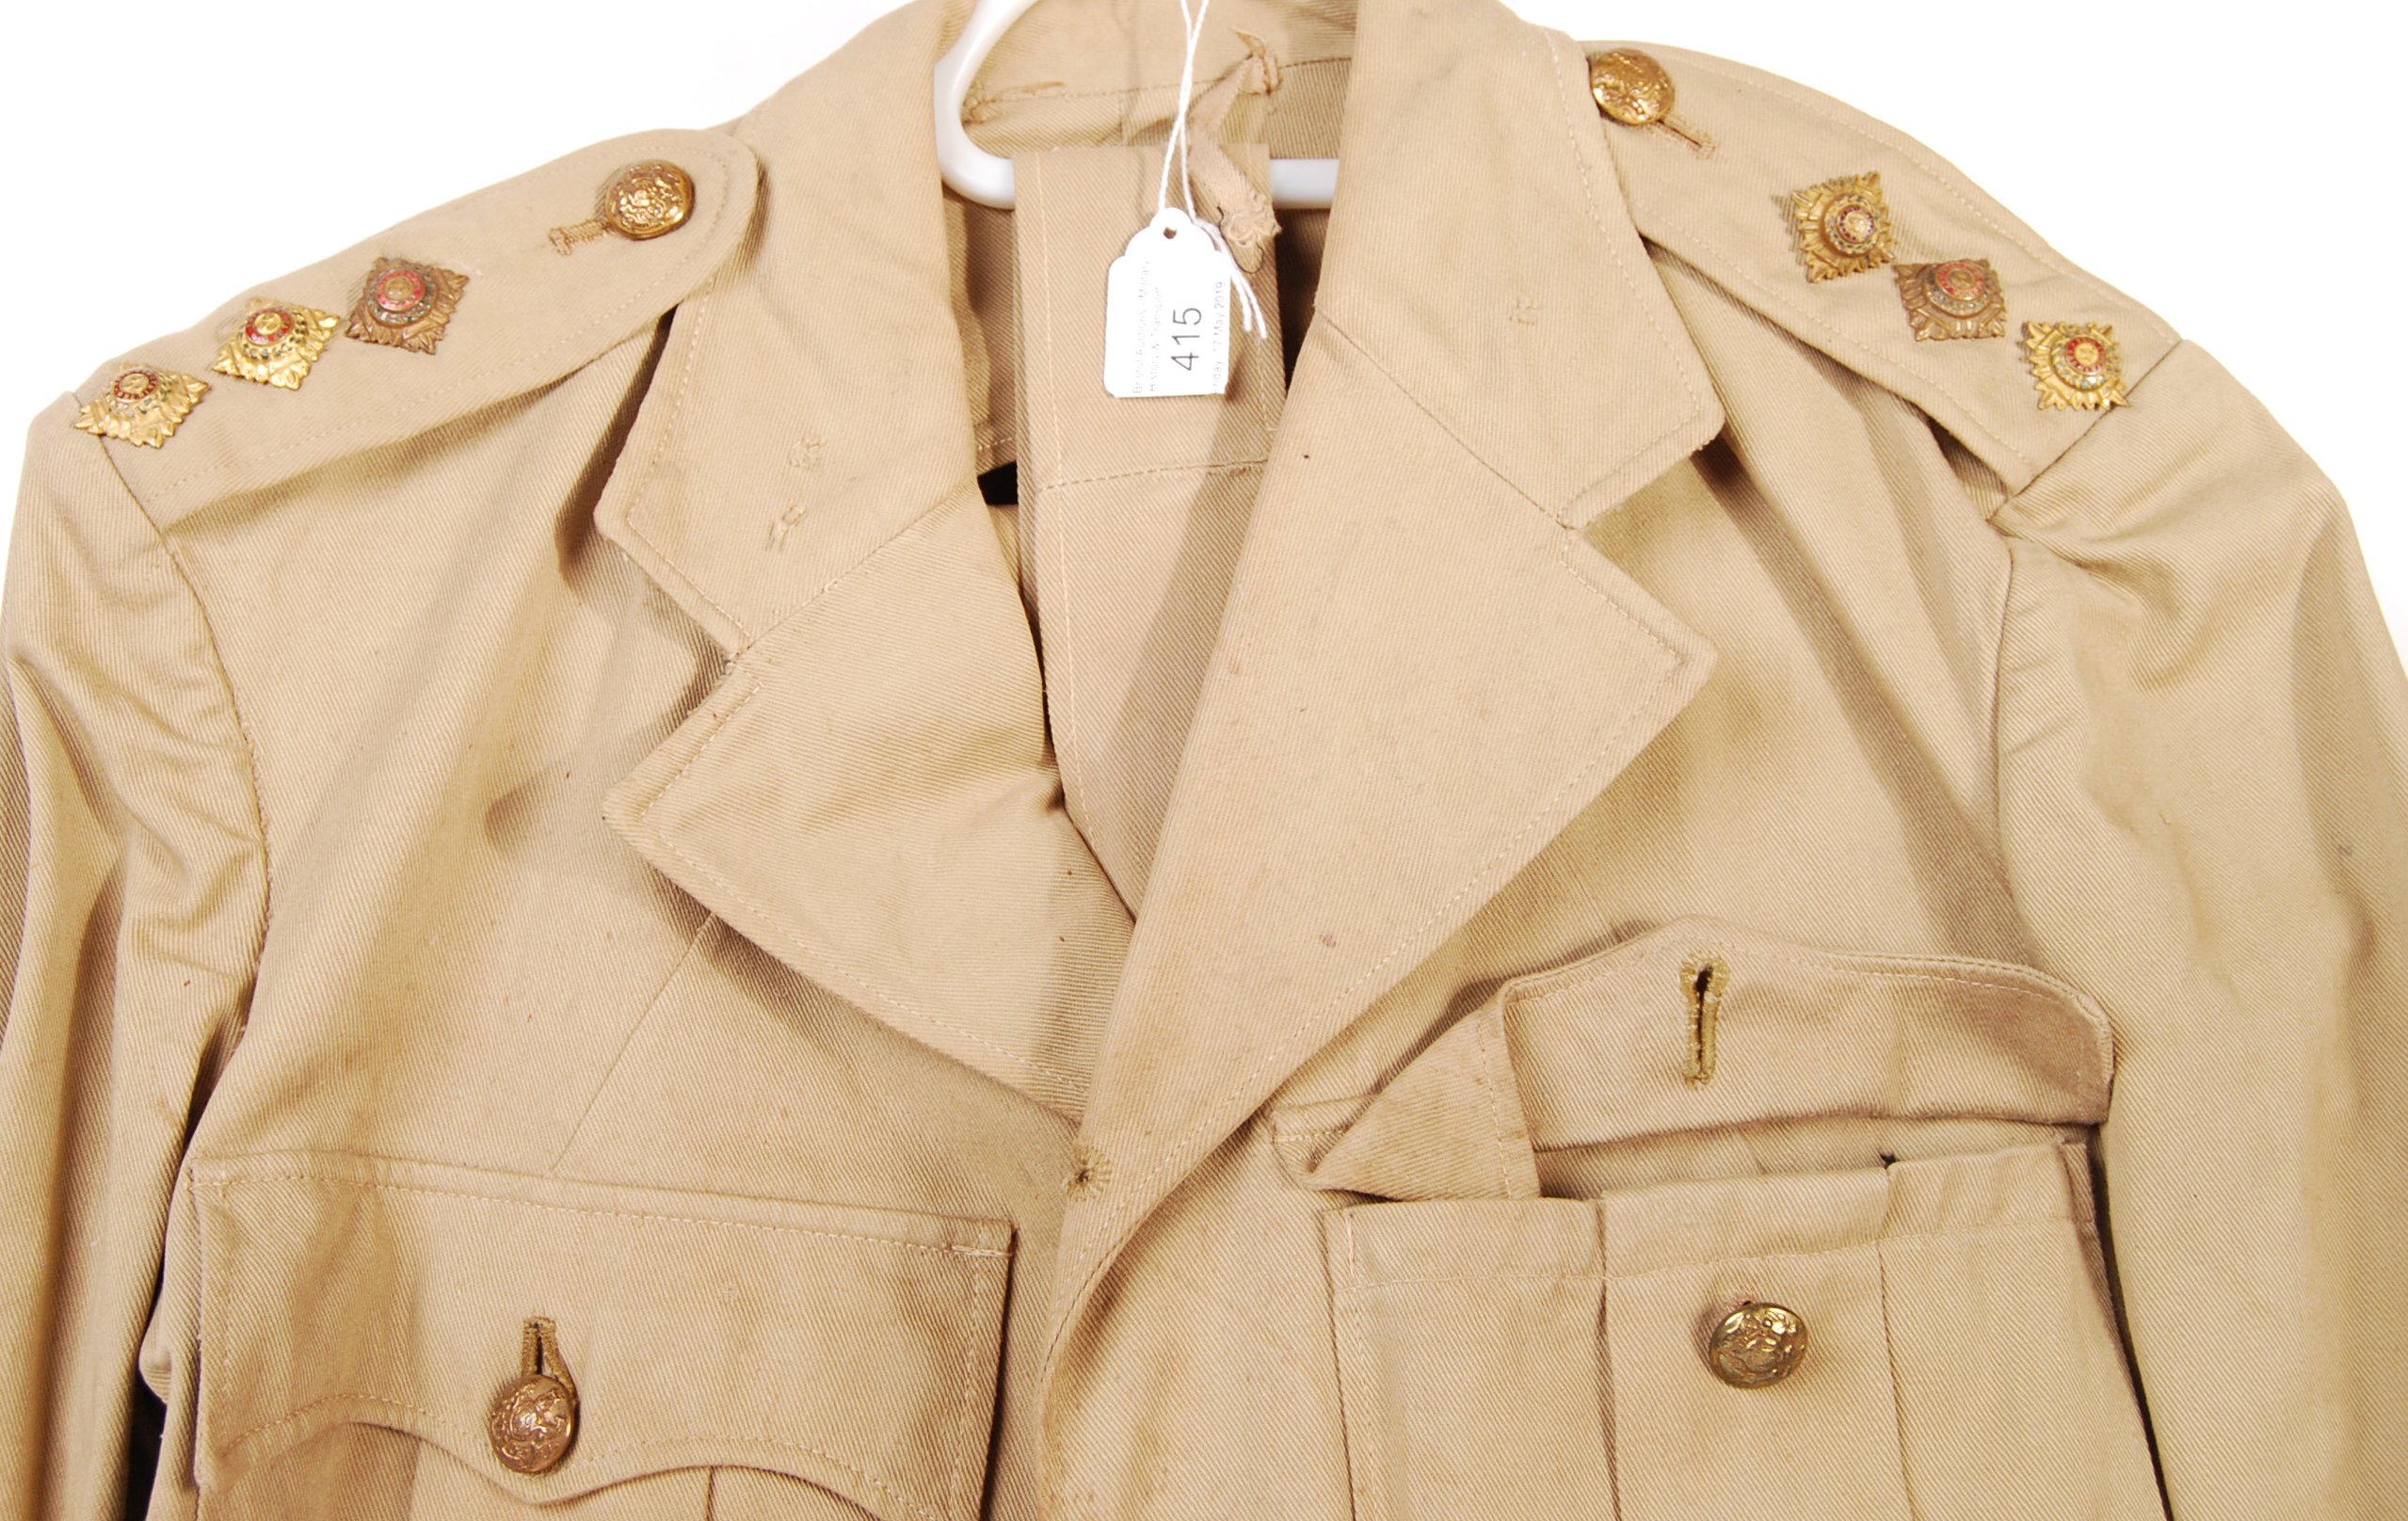 RARE WWII SERVICE UNIFORM TUNIC OWNED BY HARRY LEE, TENNIS PLAYER - Image 2 of 4